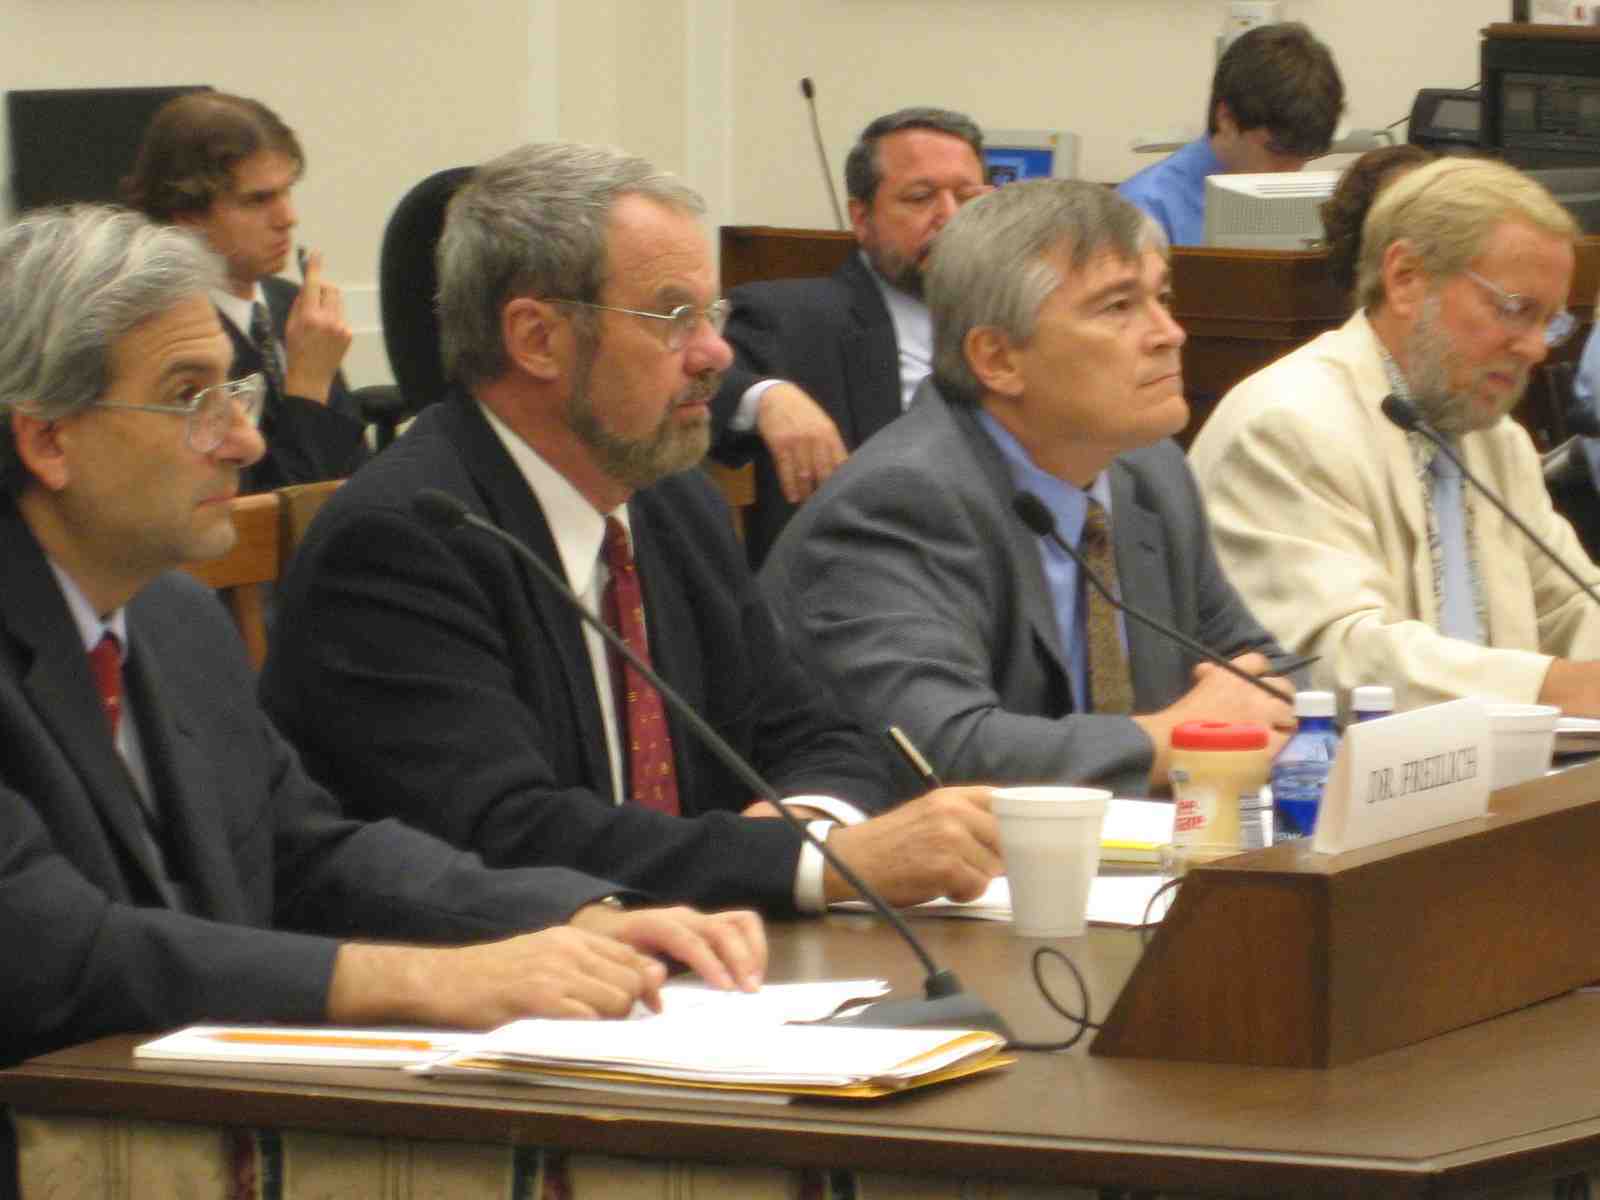 Michael Freilich (left) testifying on NASA's budget before the House Science and Technology Committee's subcommittee on space and aeronautics in 2007. (Credit: House Science and Technology Committee)